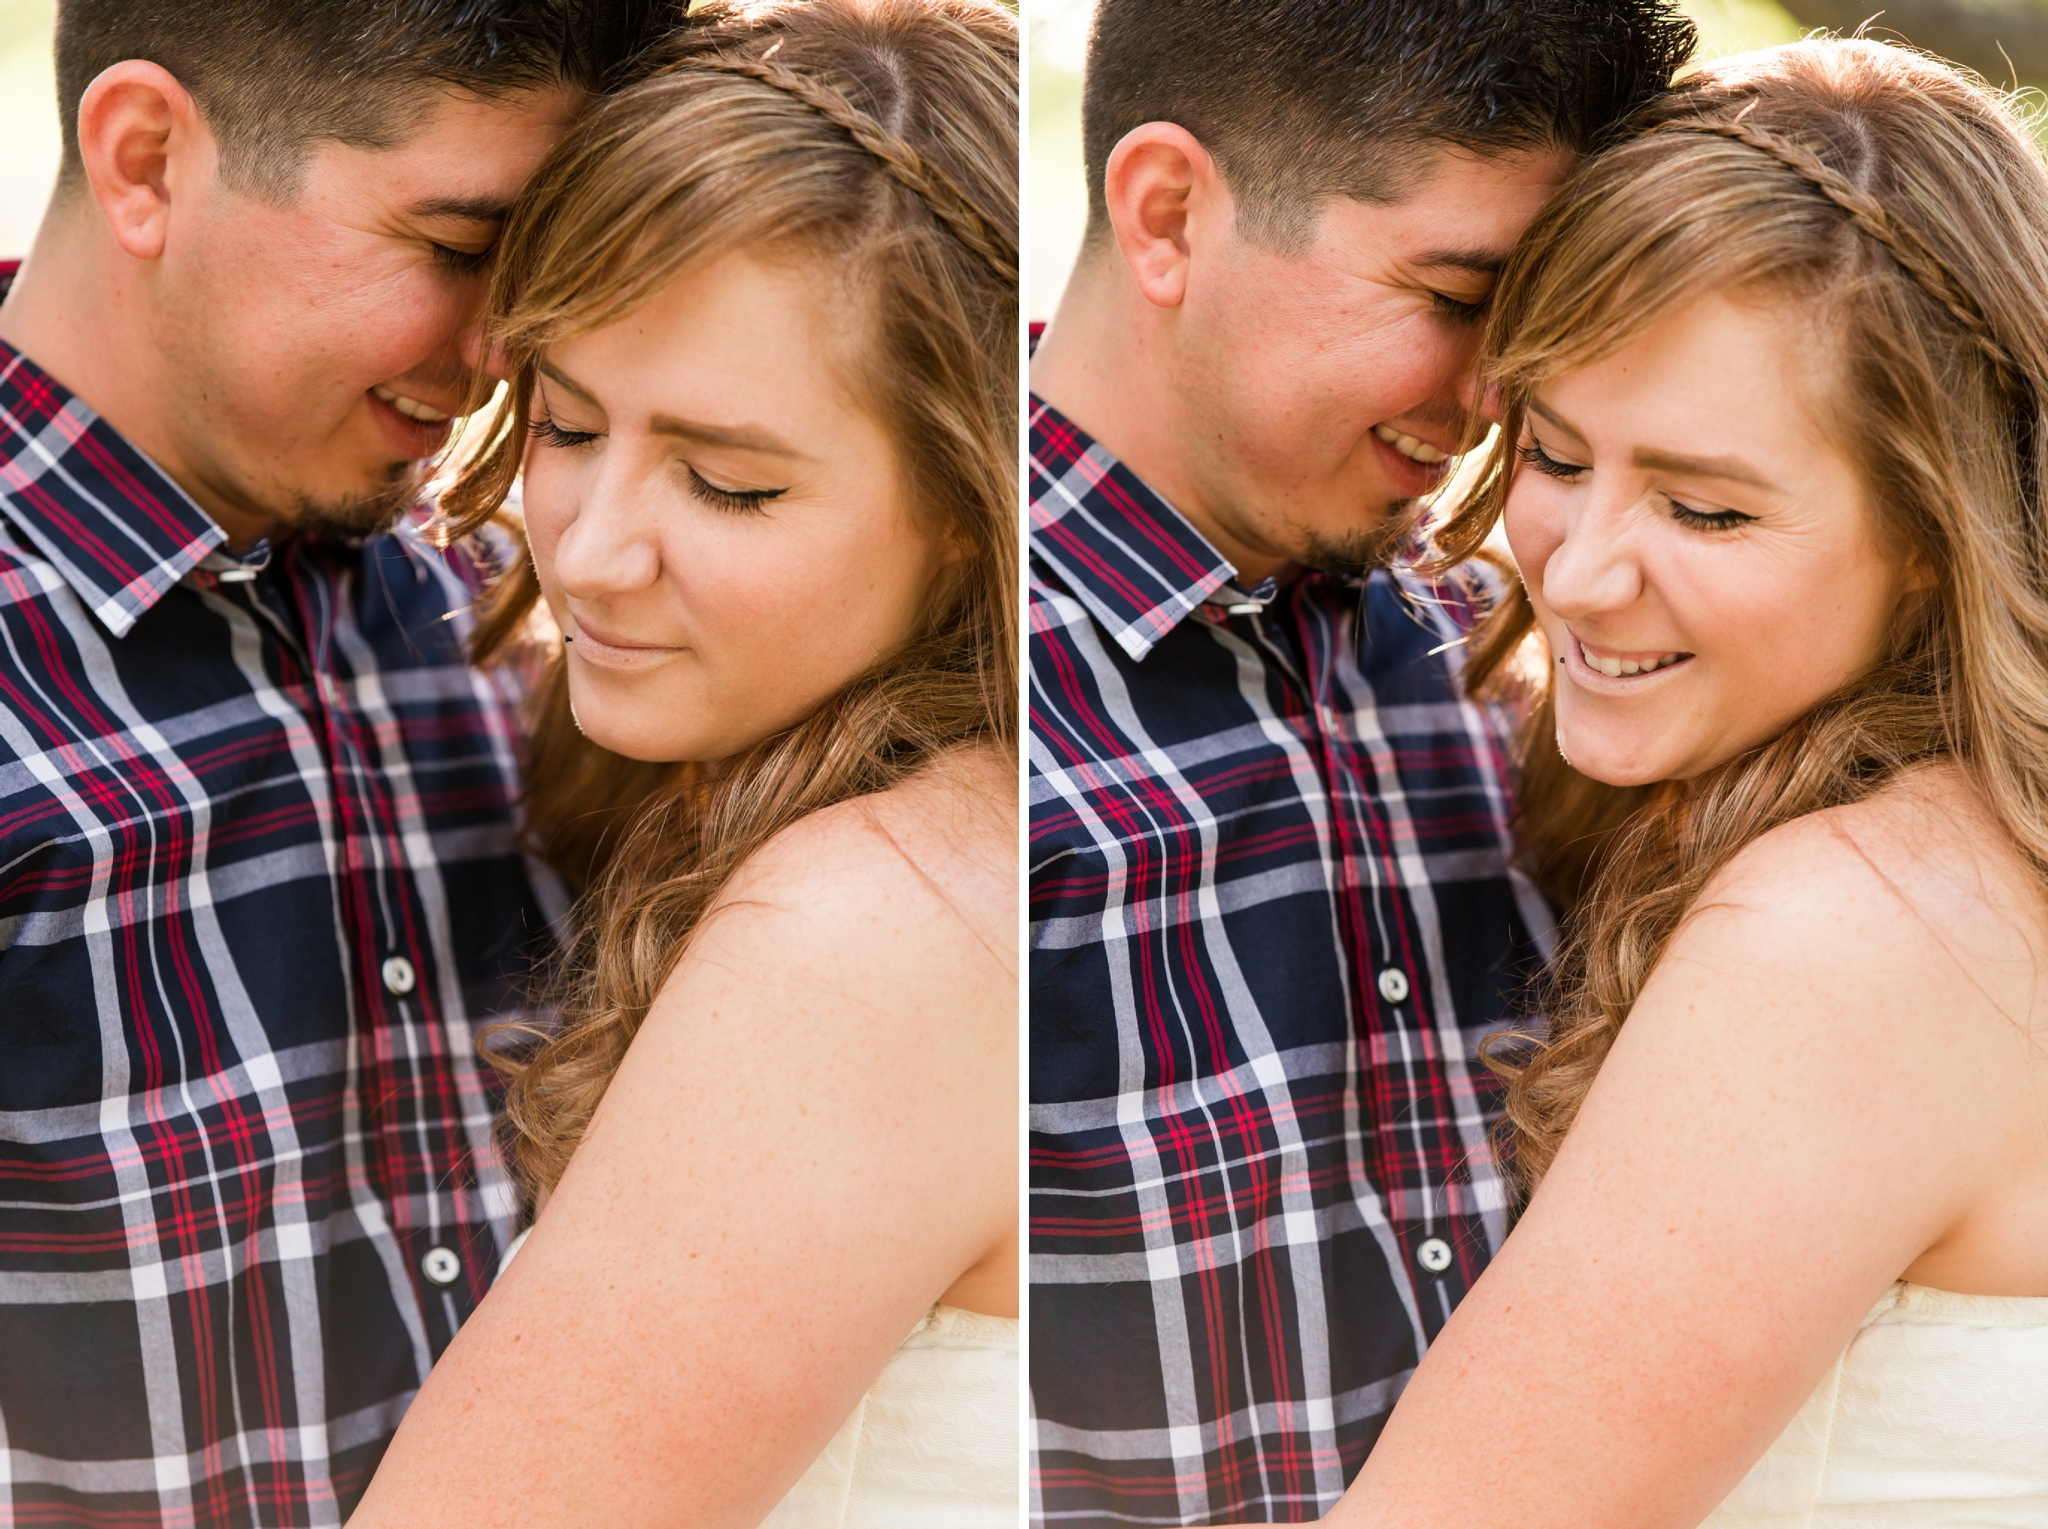 Summer Engagement Session at Cibolo Nature Center in Boerne, TX by Dawn Elizabeth Studios